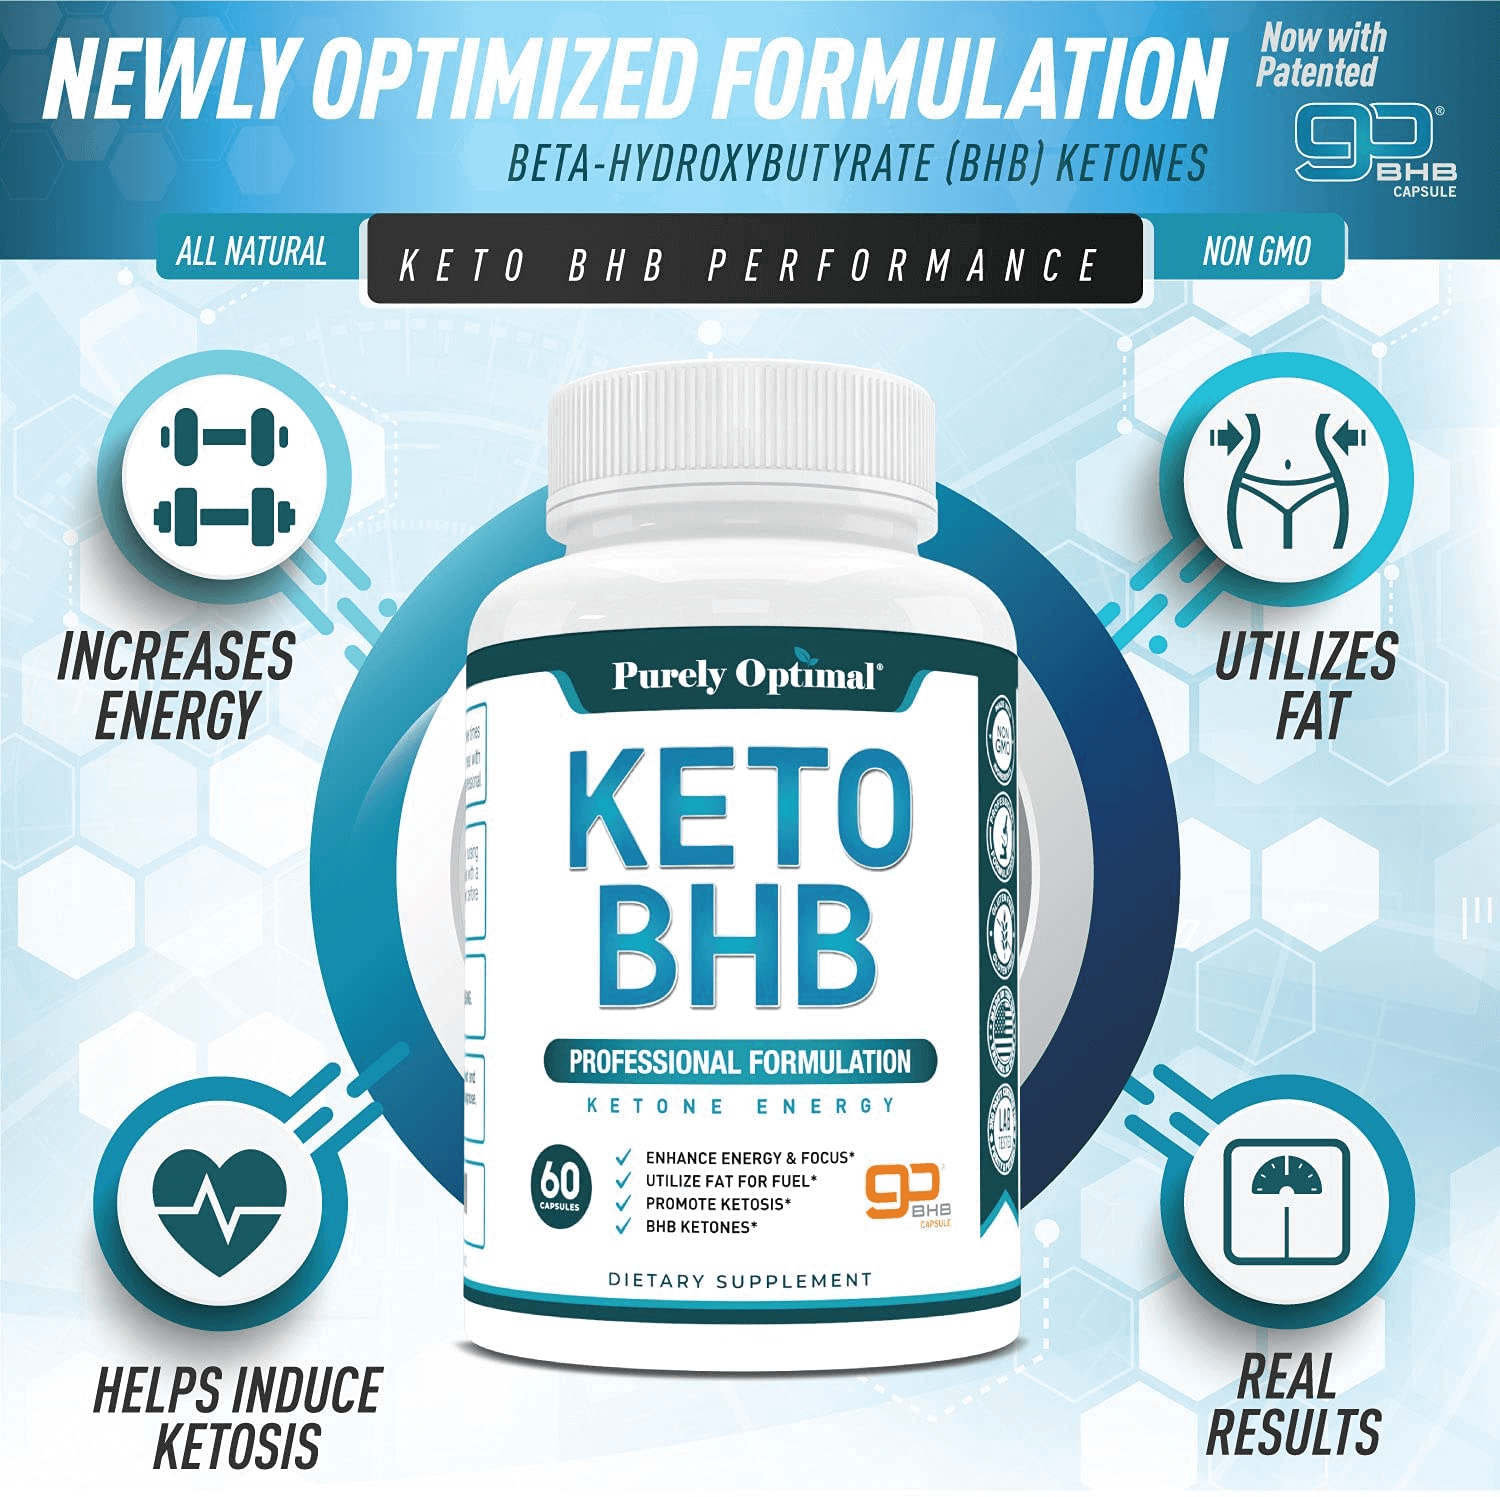 Premium Keto Diet Pills - Utilize Fat for Energy with Ketosis - Boost Energy & Focus, Manage Cravings, Support Metabolism - Keto Bhb Supplement for Women & Men - 30 Days Supply - vitamenstore.com